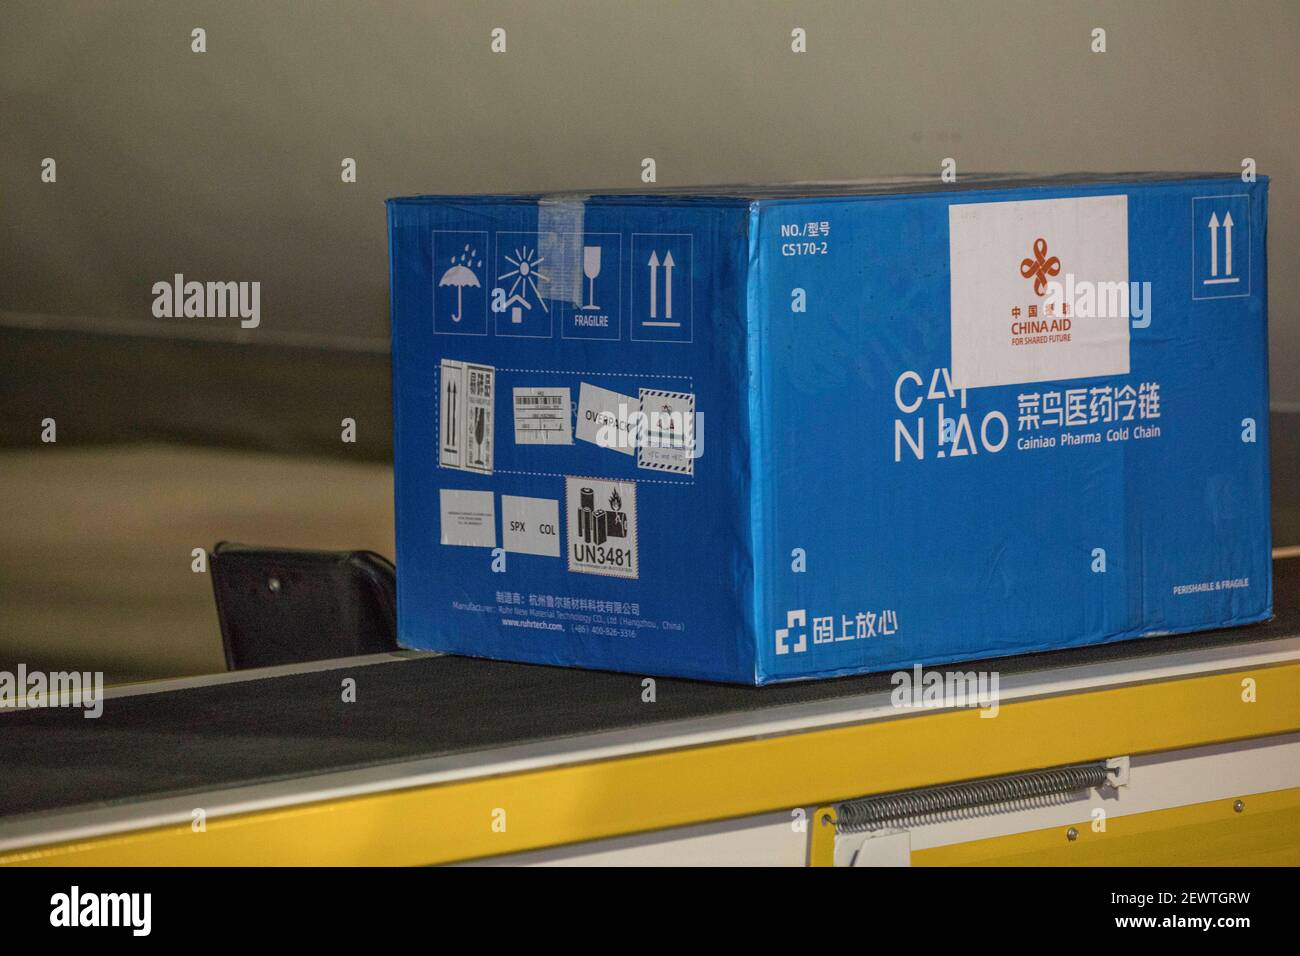 (210303) -- GEORGETOWN, March 3, 2021 (Xinhua) -- A pack of COVID-19 vaccines donated by the Chinese government is seen at an airport in Georgetown, capital of Guyana, March 2, 2021. Guyana on Tuesday received a shipment of COVID-19 vaccines donated by the Chinese government to help the country combat the pandemic.Guyana's Minister of Health Frank Anthony and Charge d'Affaires of the Chinese Embassy to Guyana Chen Xilai welcomed the shipment at an airport in Guyana's capital Georgetown and signed official documents on the handover of the vaccines. (Department of Public Information of Guyana/Ha Stock Photo